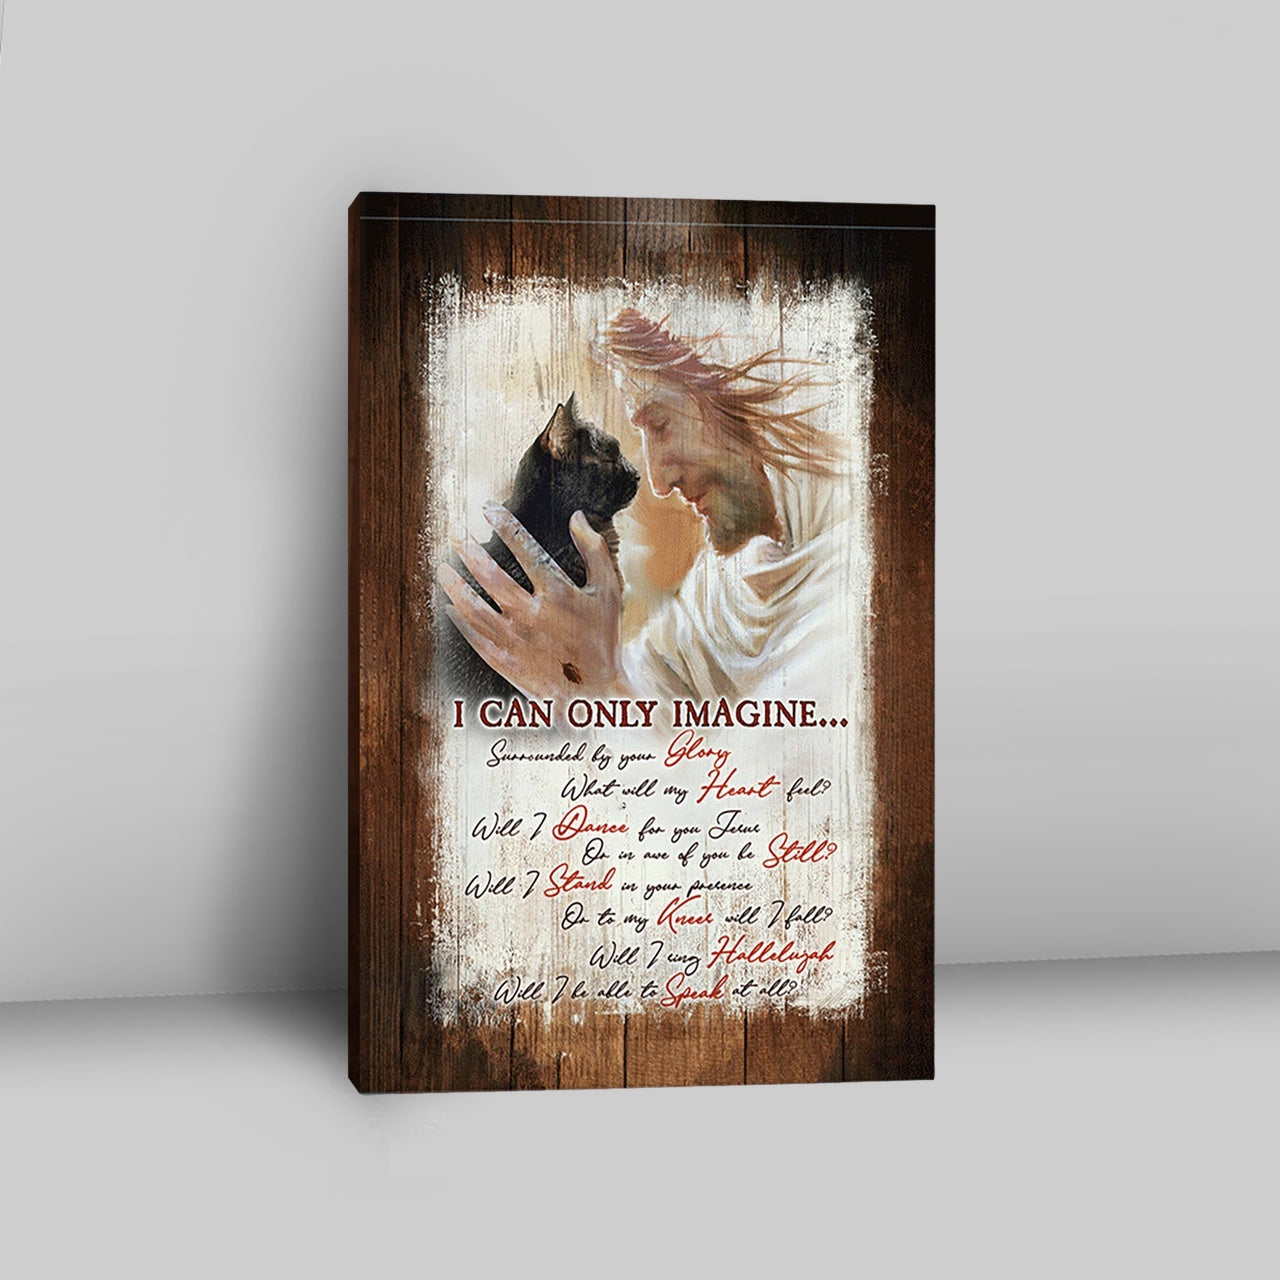 I Can Only Imagine Black Cat Jesus Canvas - Take My Hand Canvas Wall Art - Bible Verse Canvas Art - Christian Home Decor